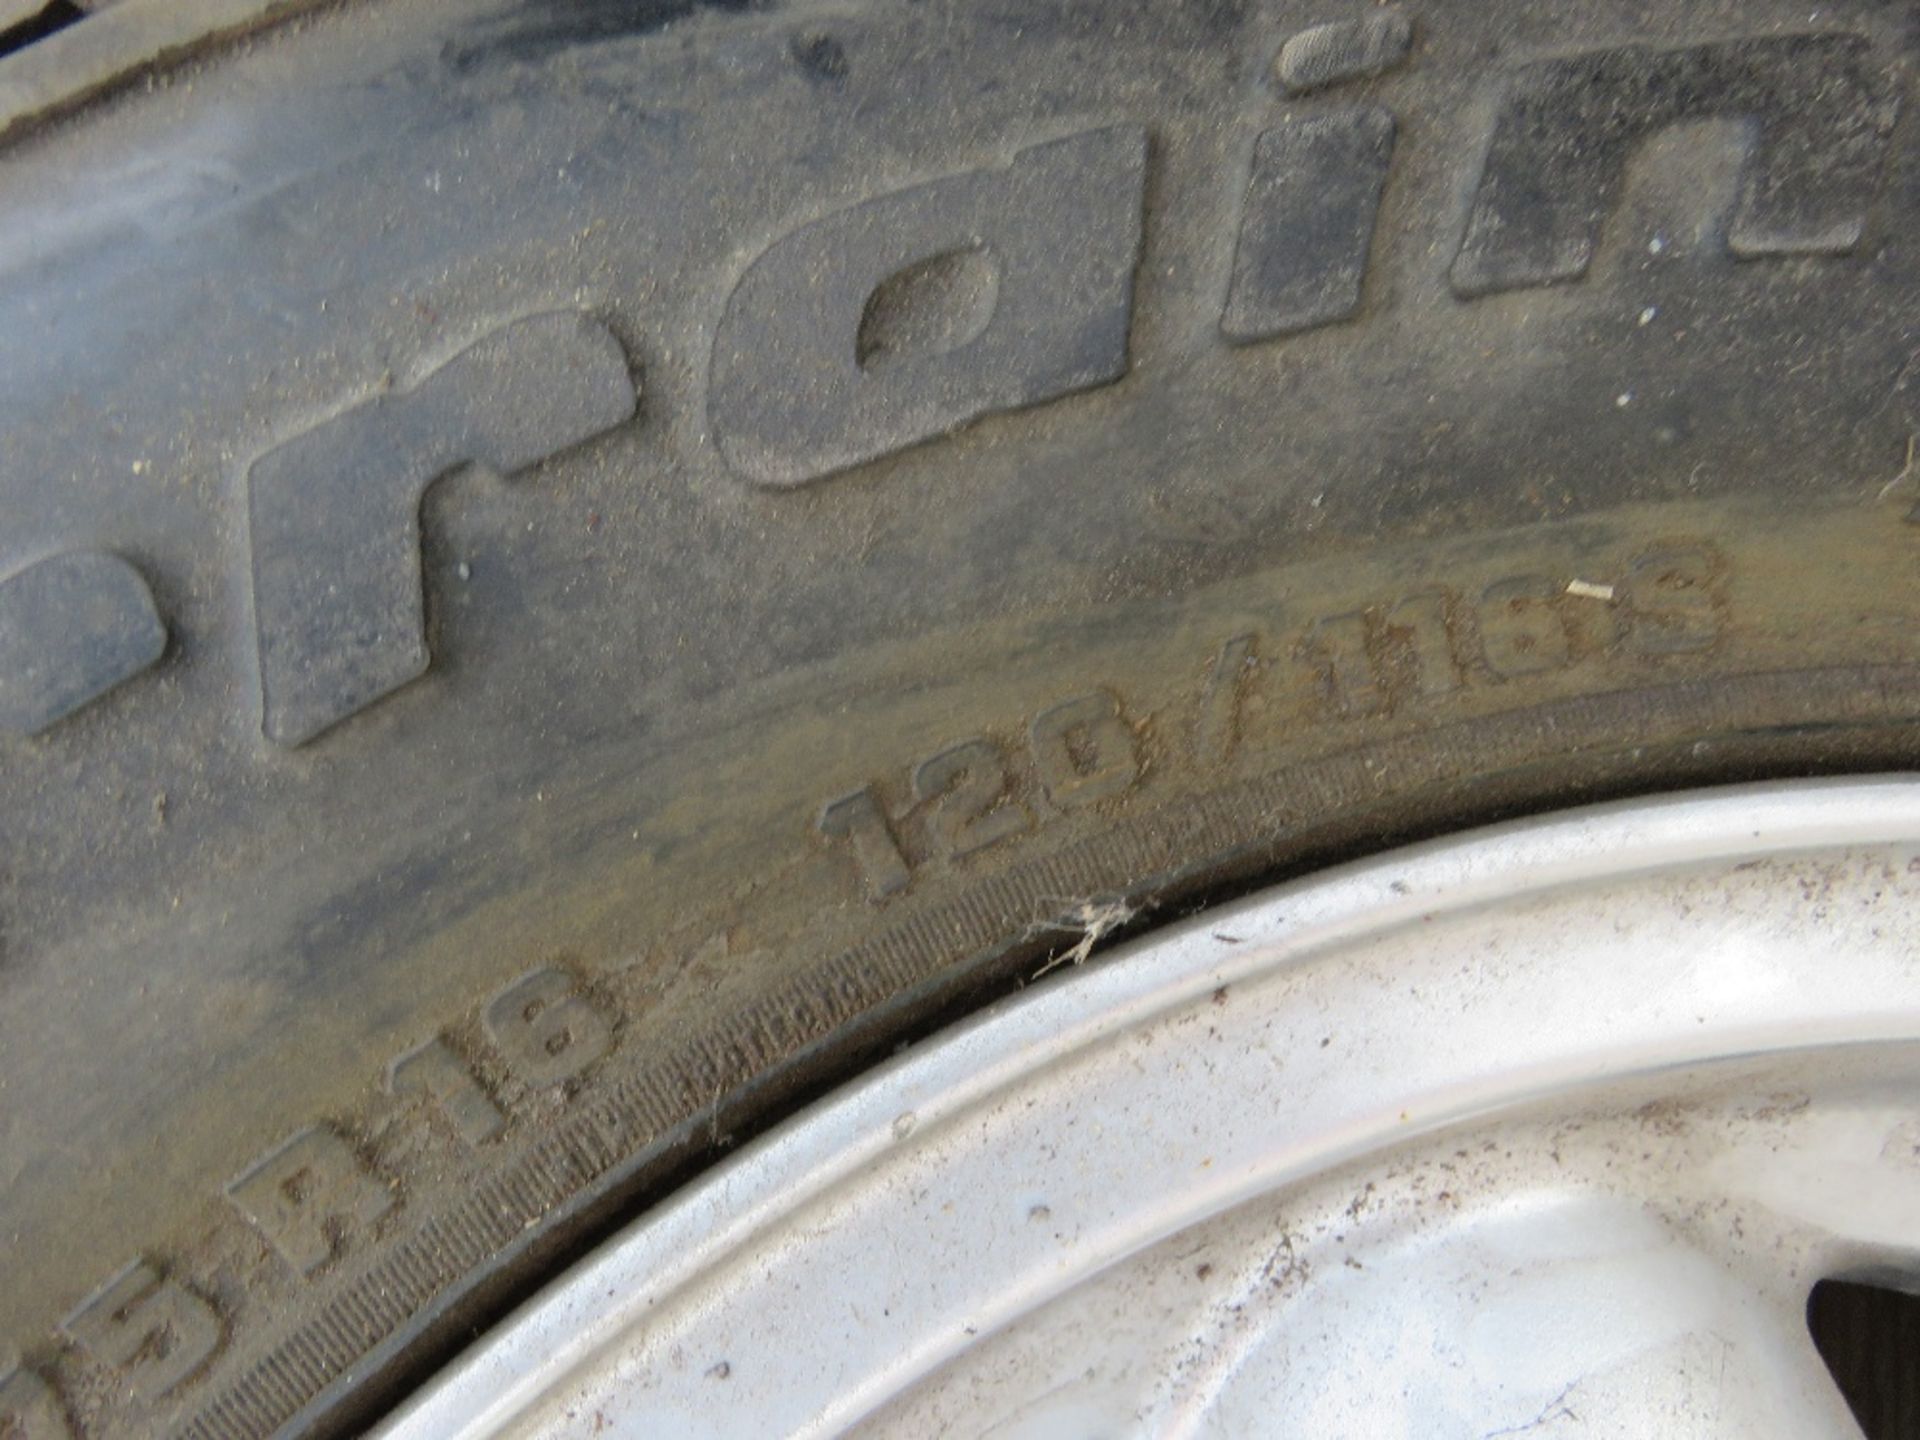 2 X LANDROVER DISCOVERY ALLOY WHEELS AND TYRES. THIS LOT IS SOLD UNDER THE AUCTIONEERS MARGIN SCH - Image 6 of 6